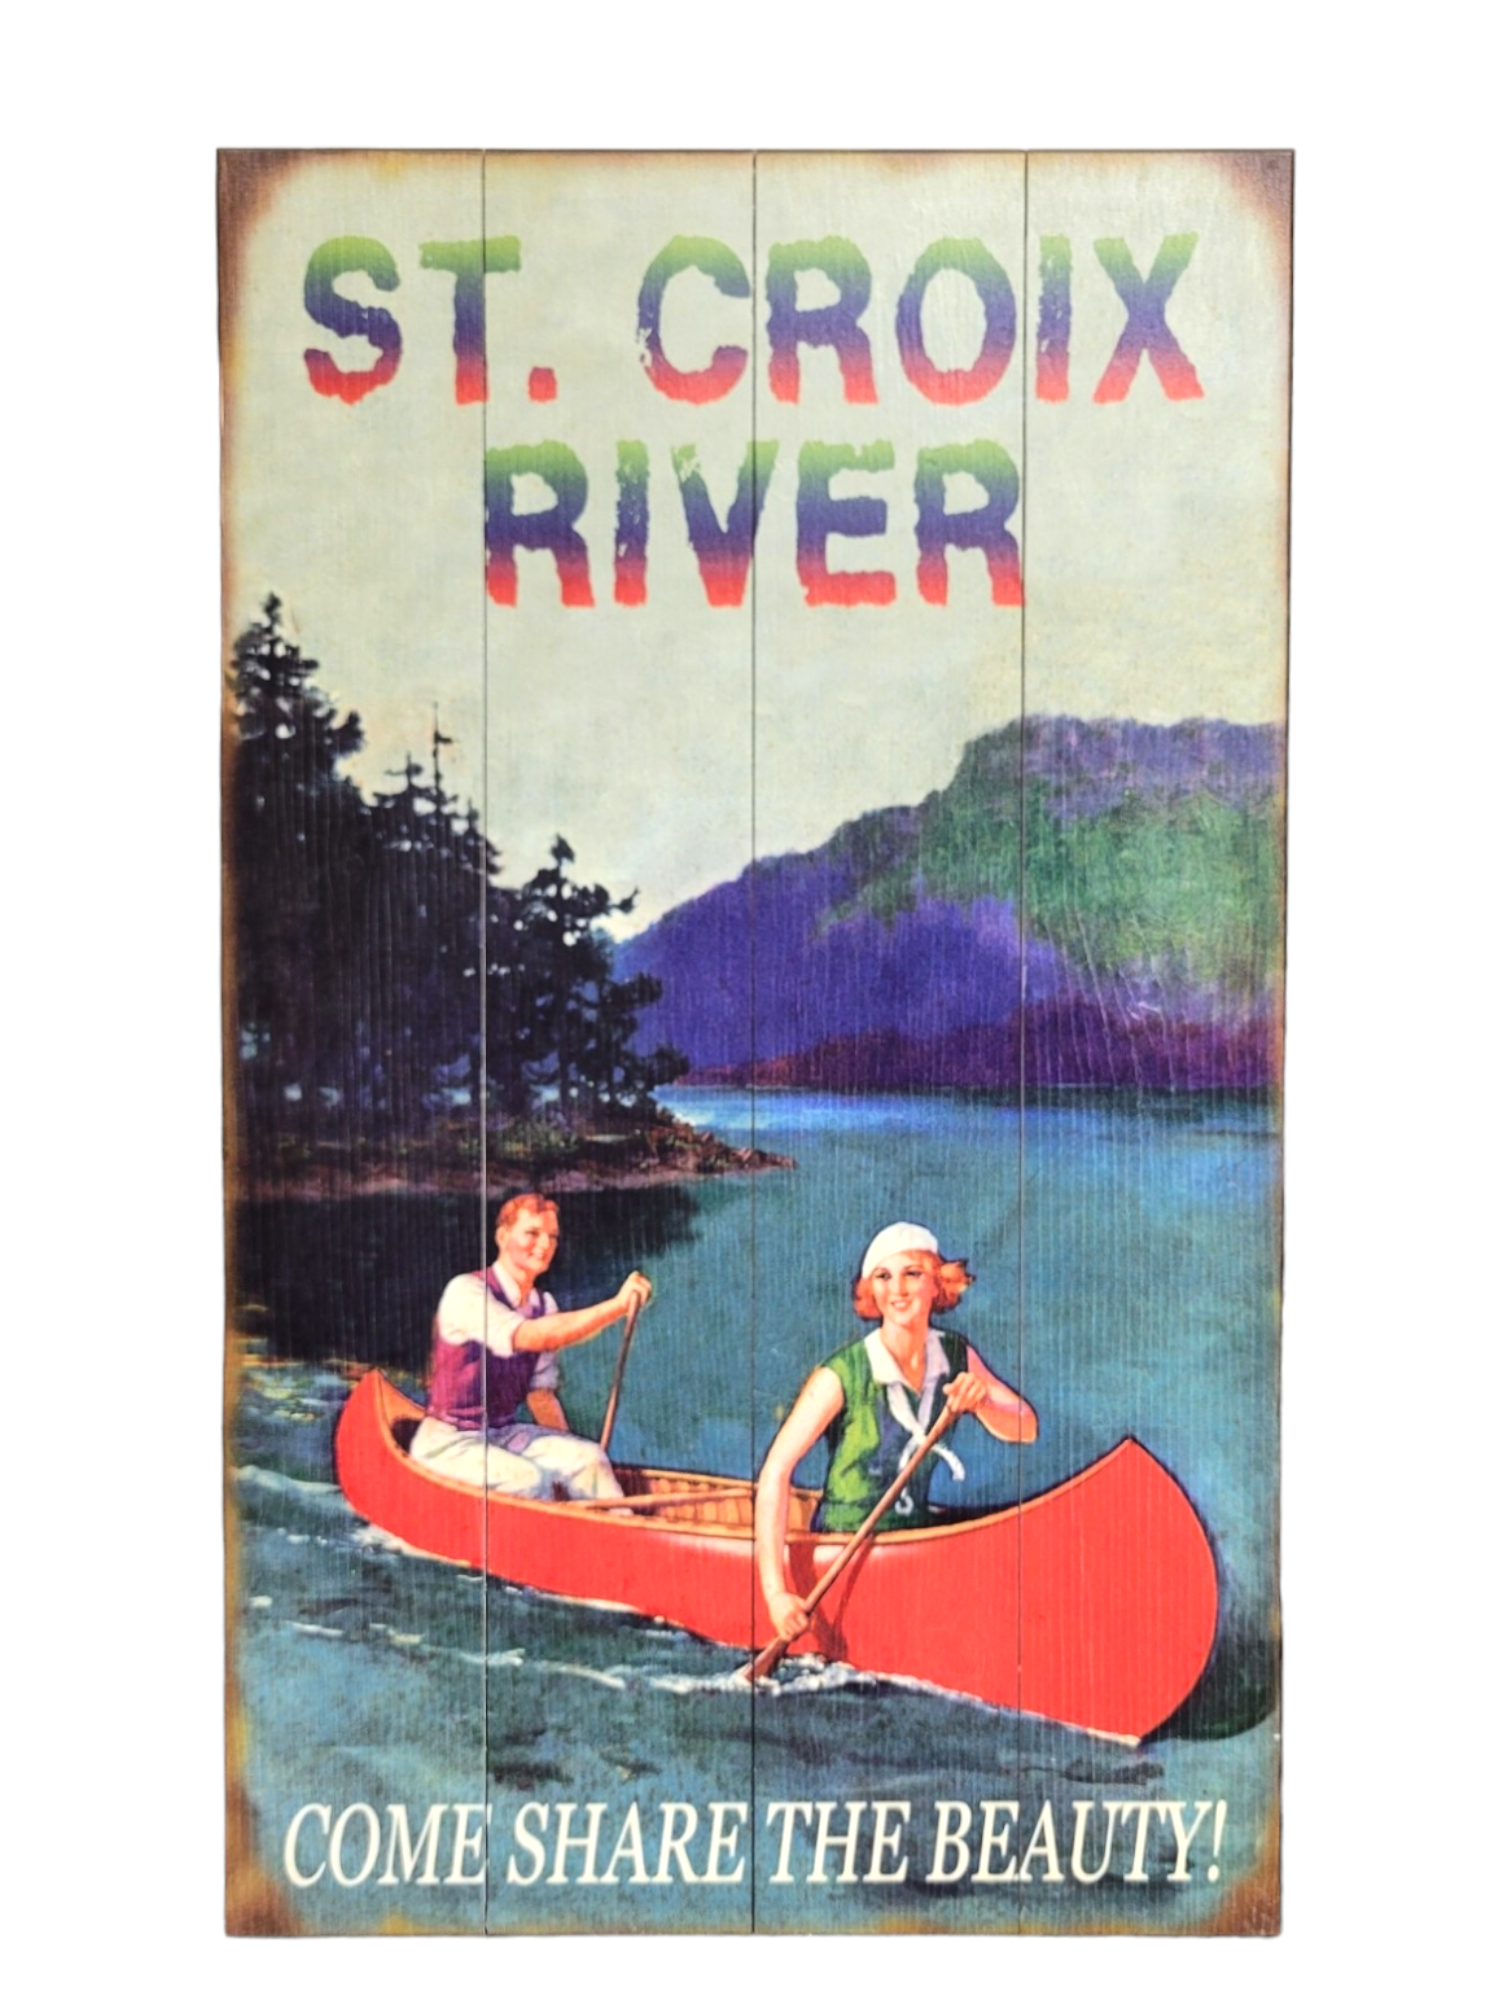 Sign: "Come Share the Beauty!" - St. Croix River